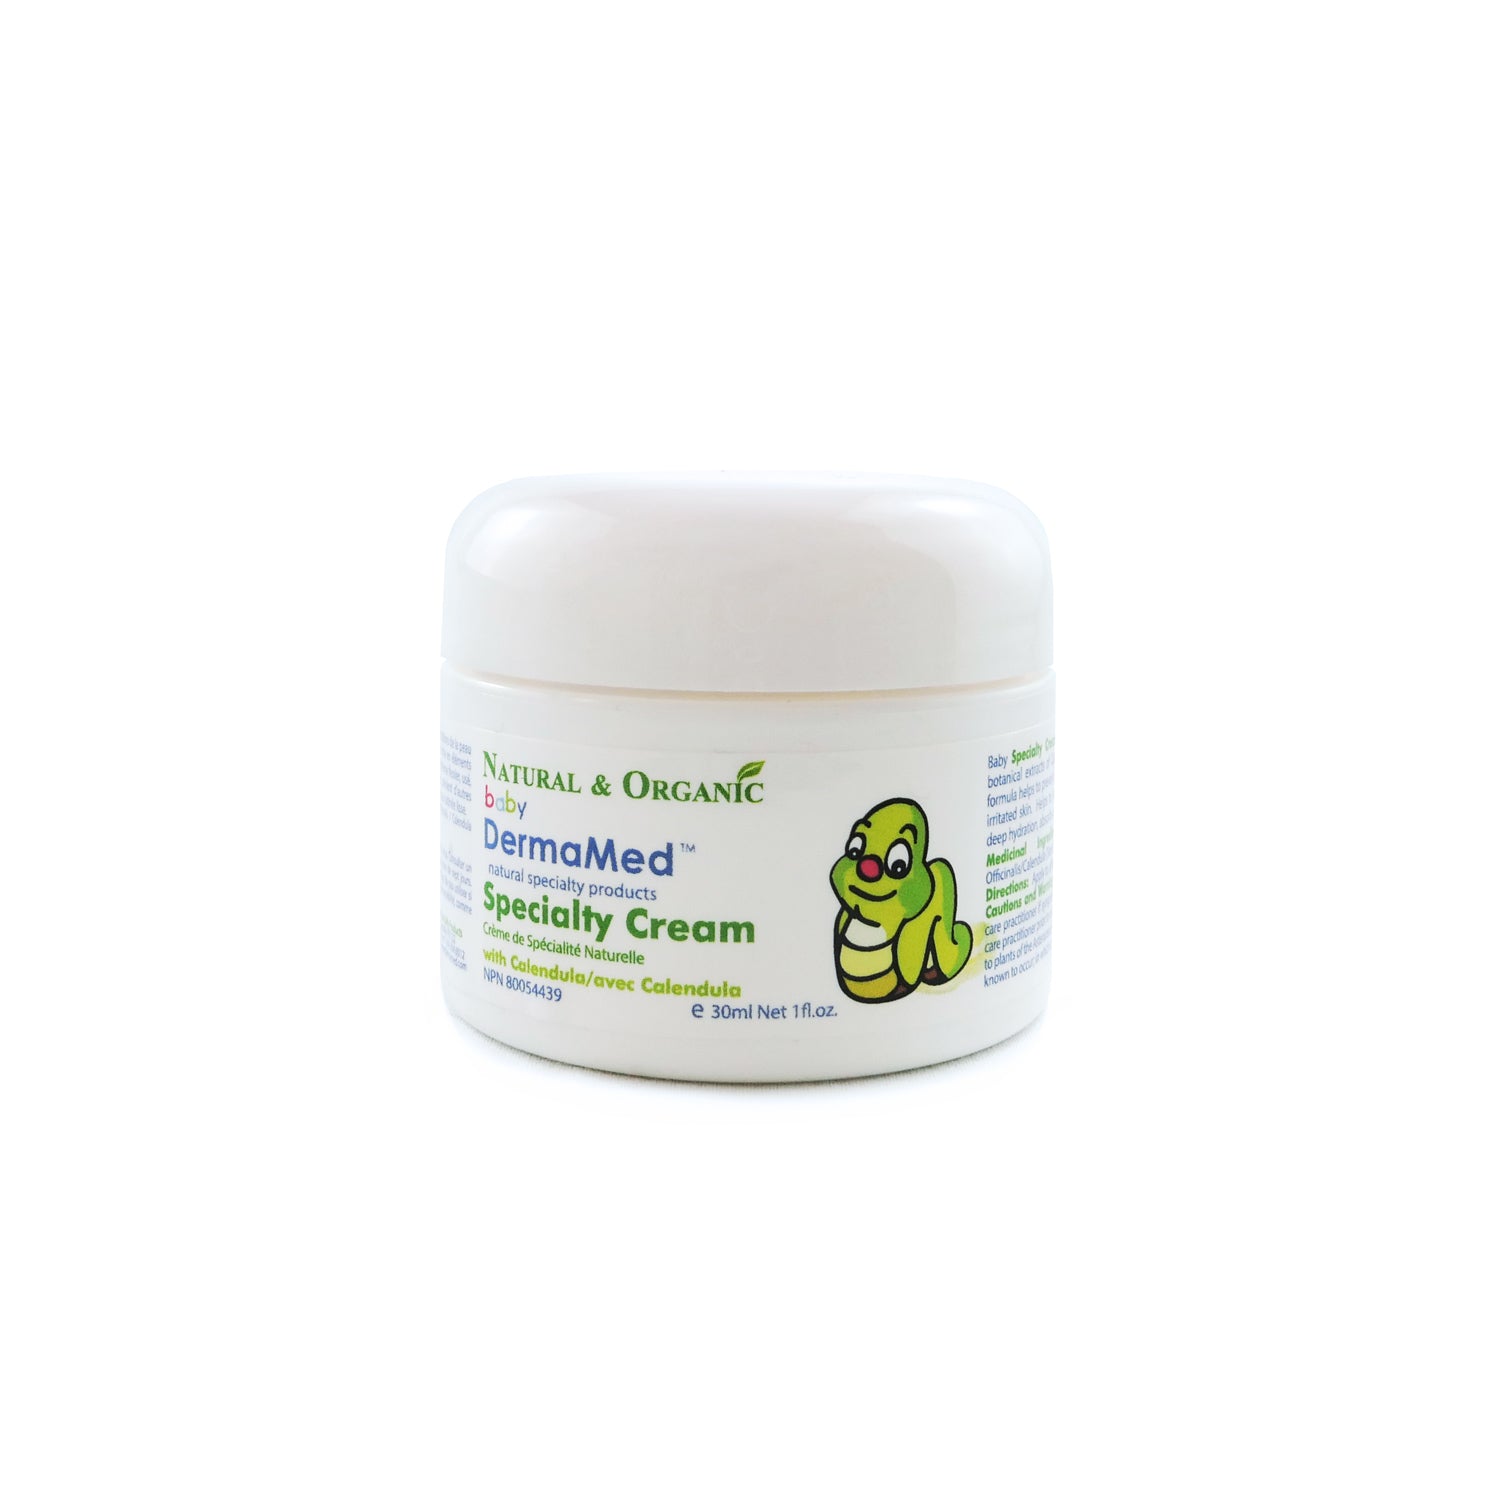 Baby Natural Specialty Cream - Dermamed Pharmaceutical